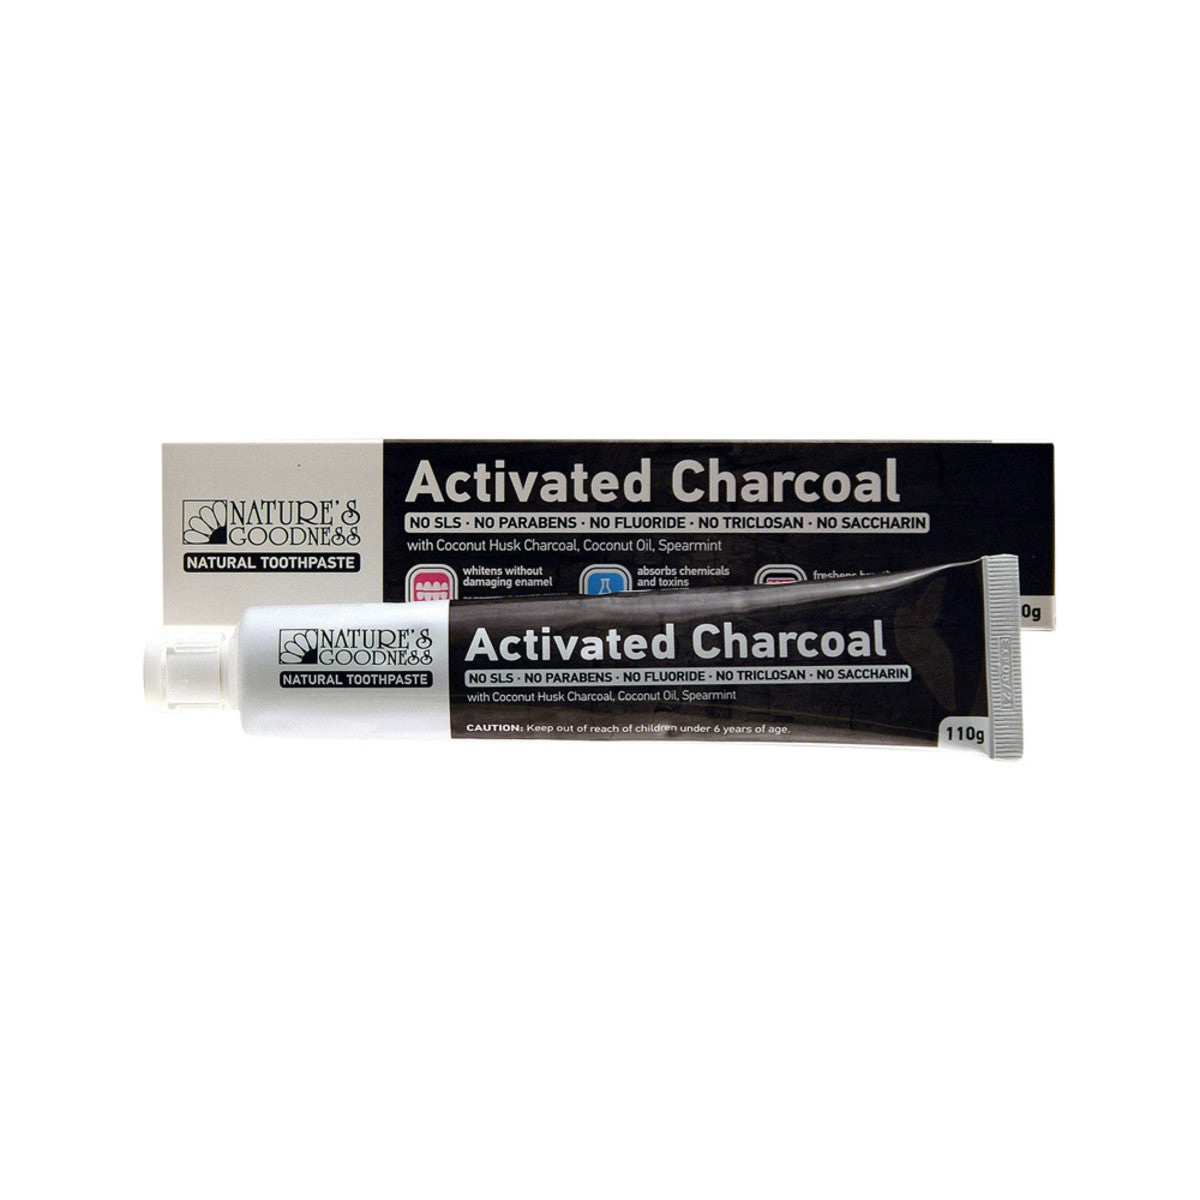 image of Nature's Goodness Toothpaste Activated Charcoal 110g on white background